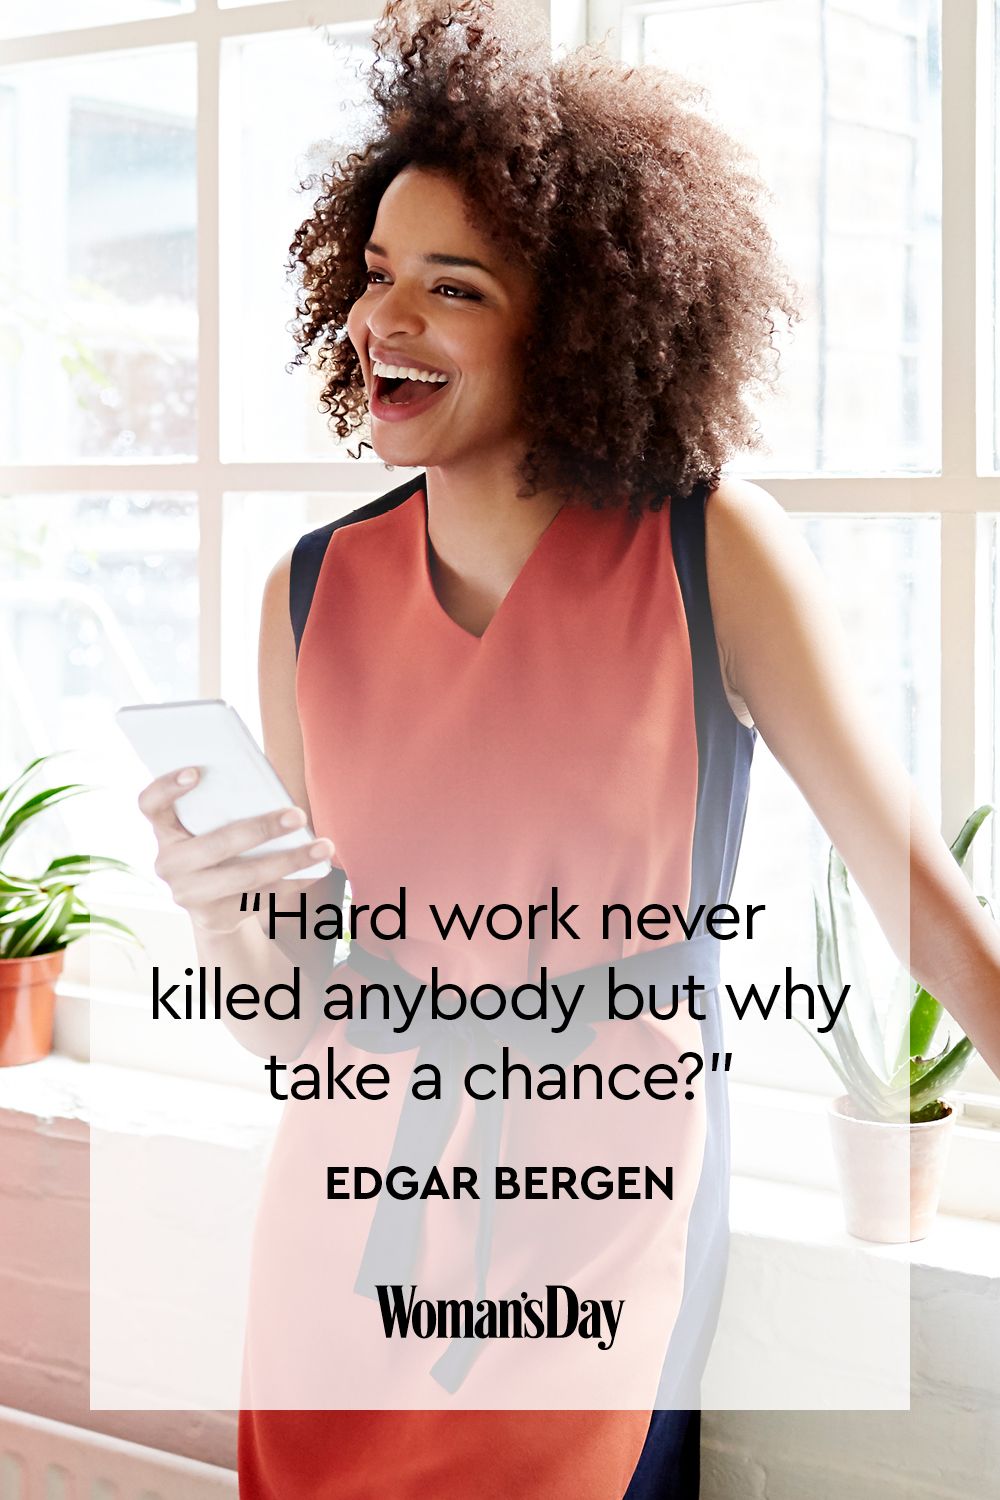 15 Funny Quotes About Work to Get You Through the Day